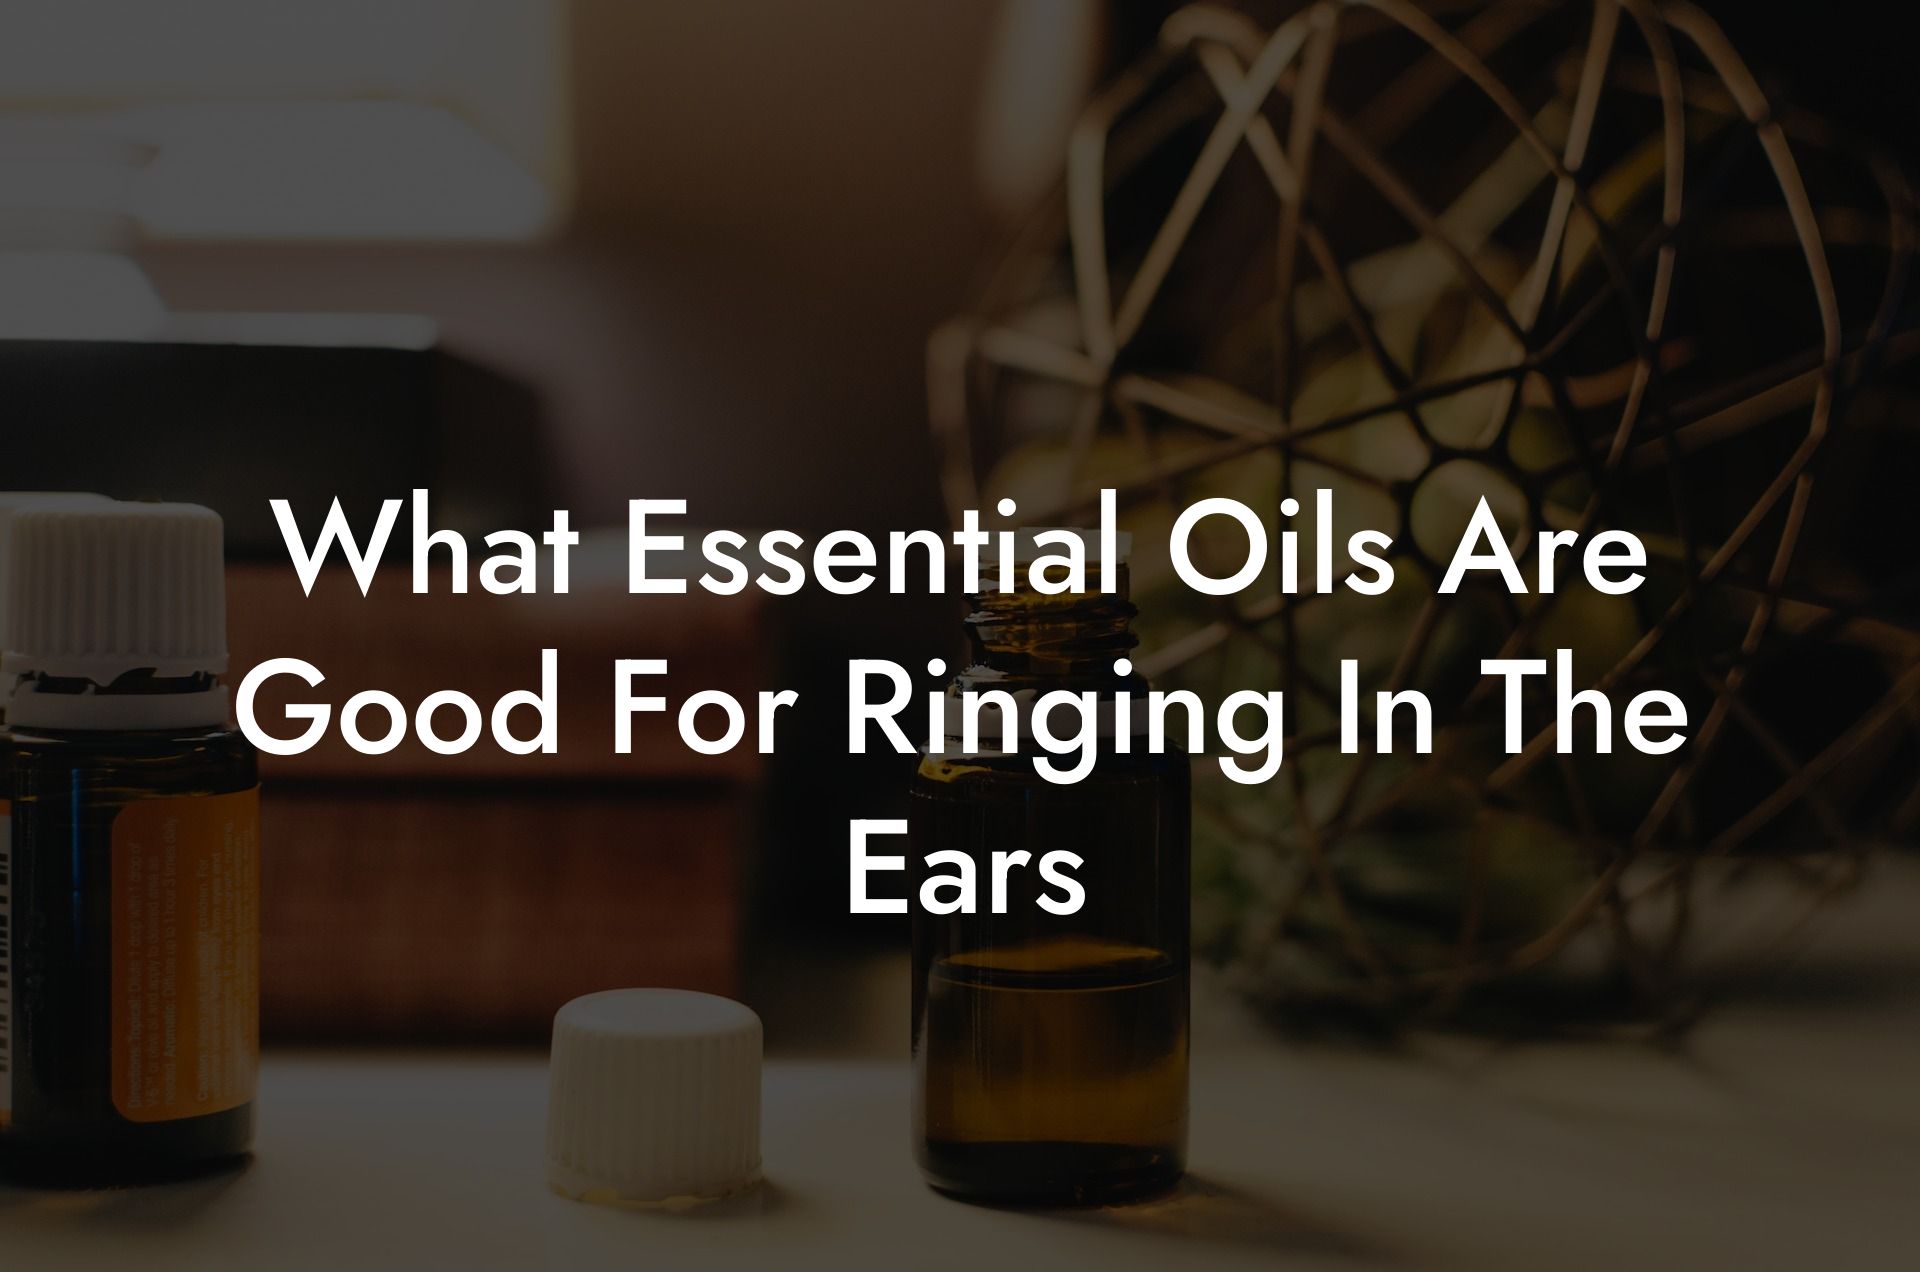 What Essential Oils Are Good For Ringing In The Ears